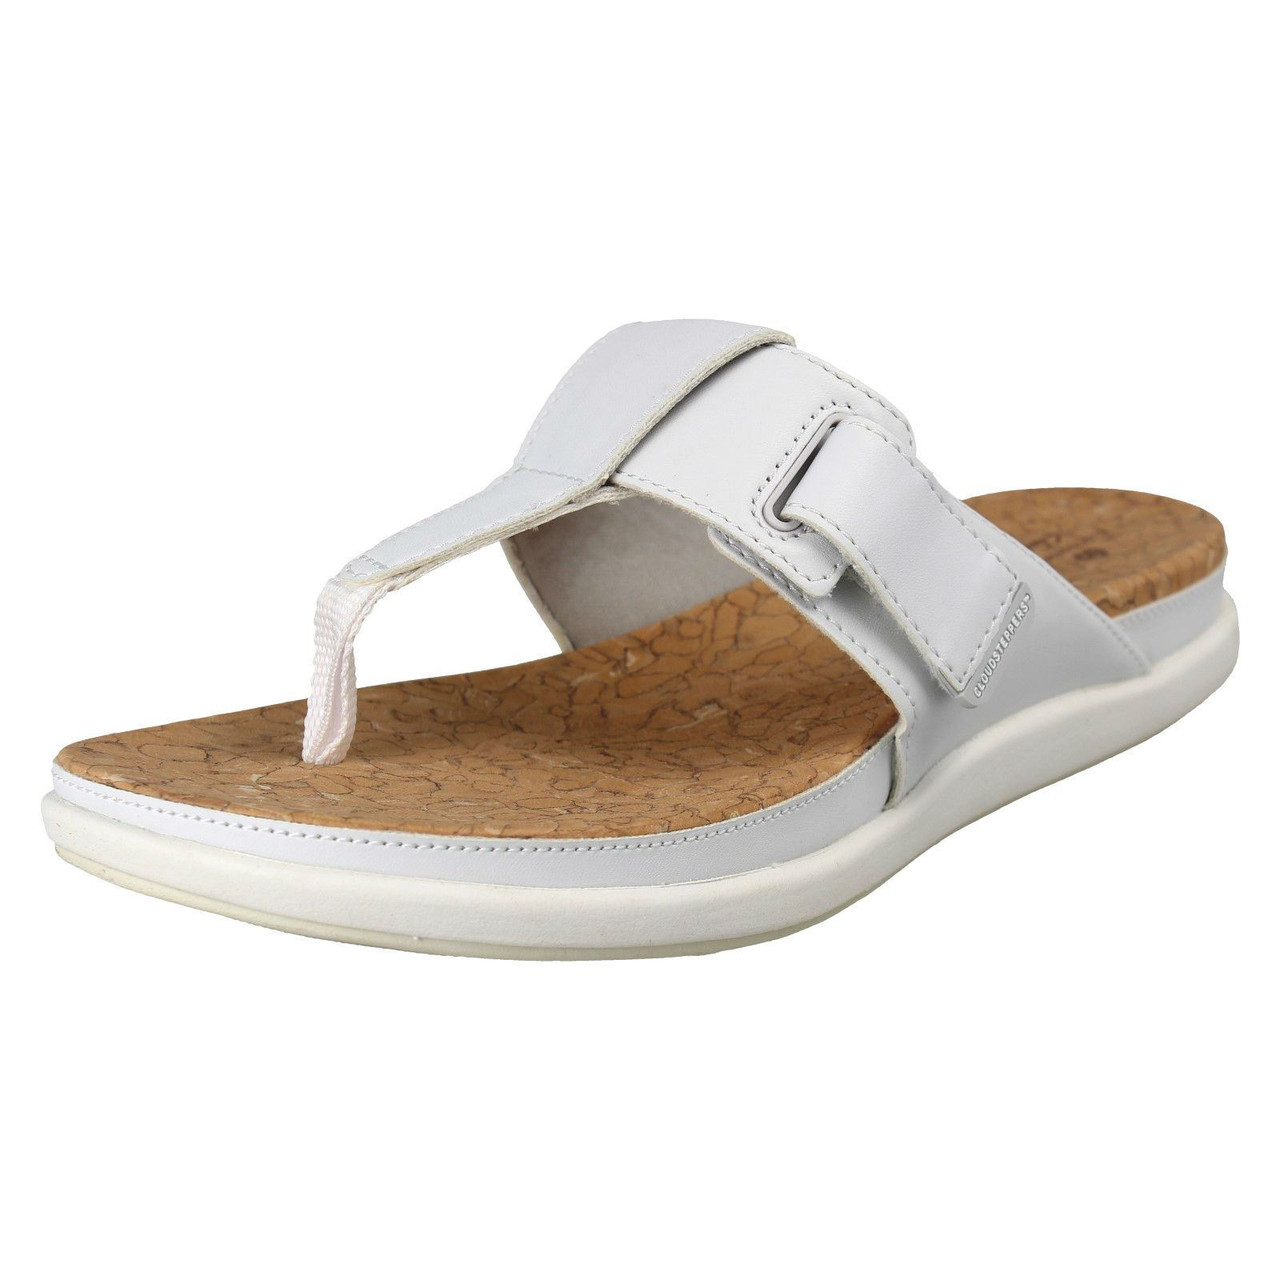 cloud steppers sandals